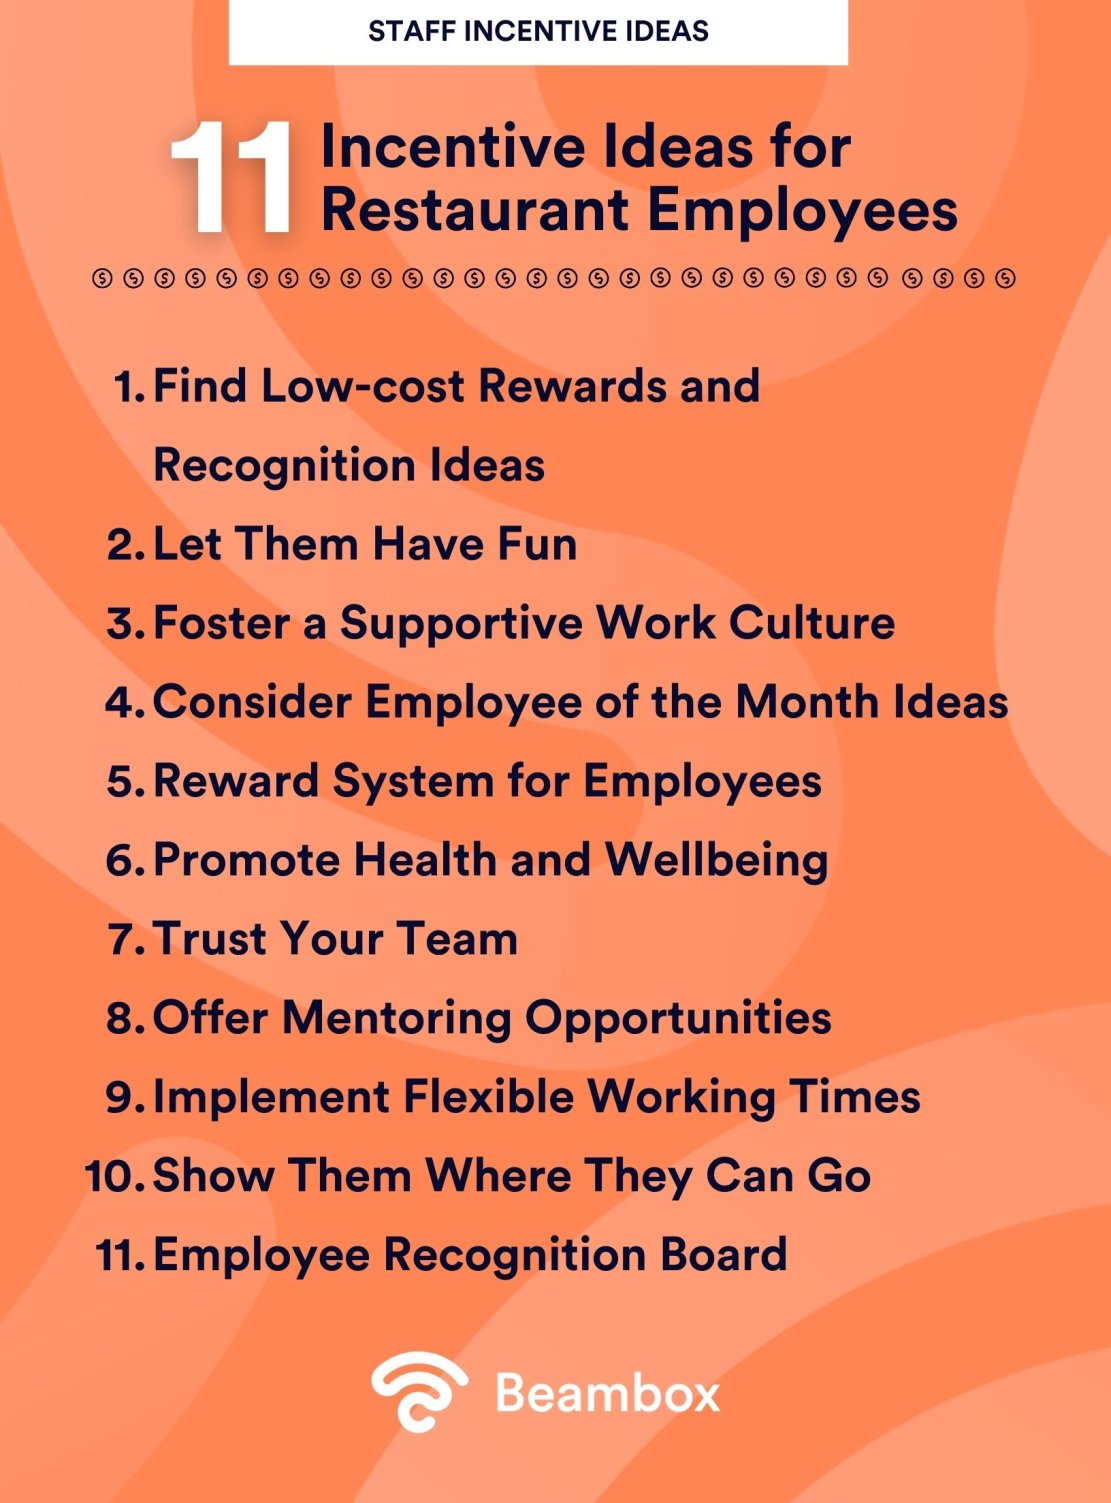 funny ways to motivate employees